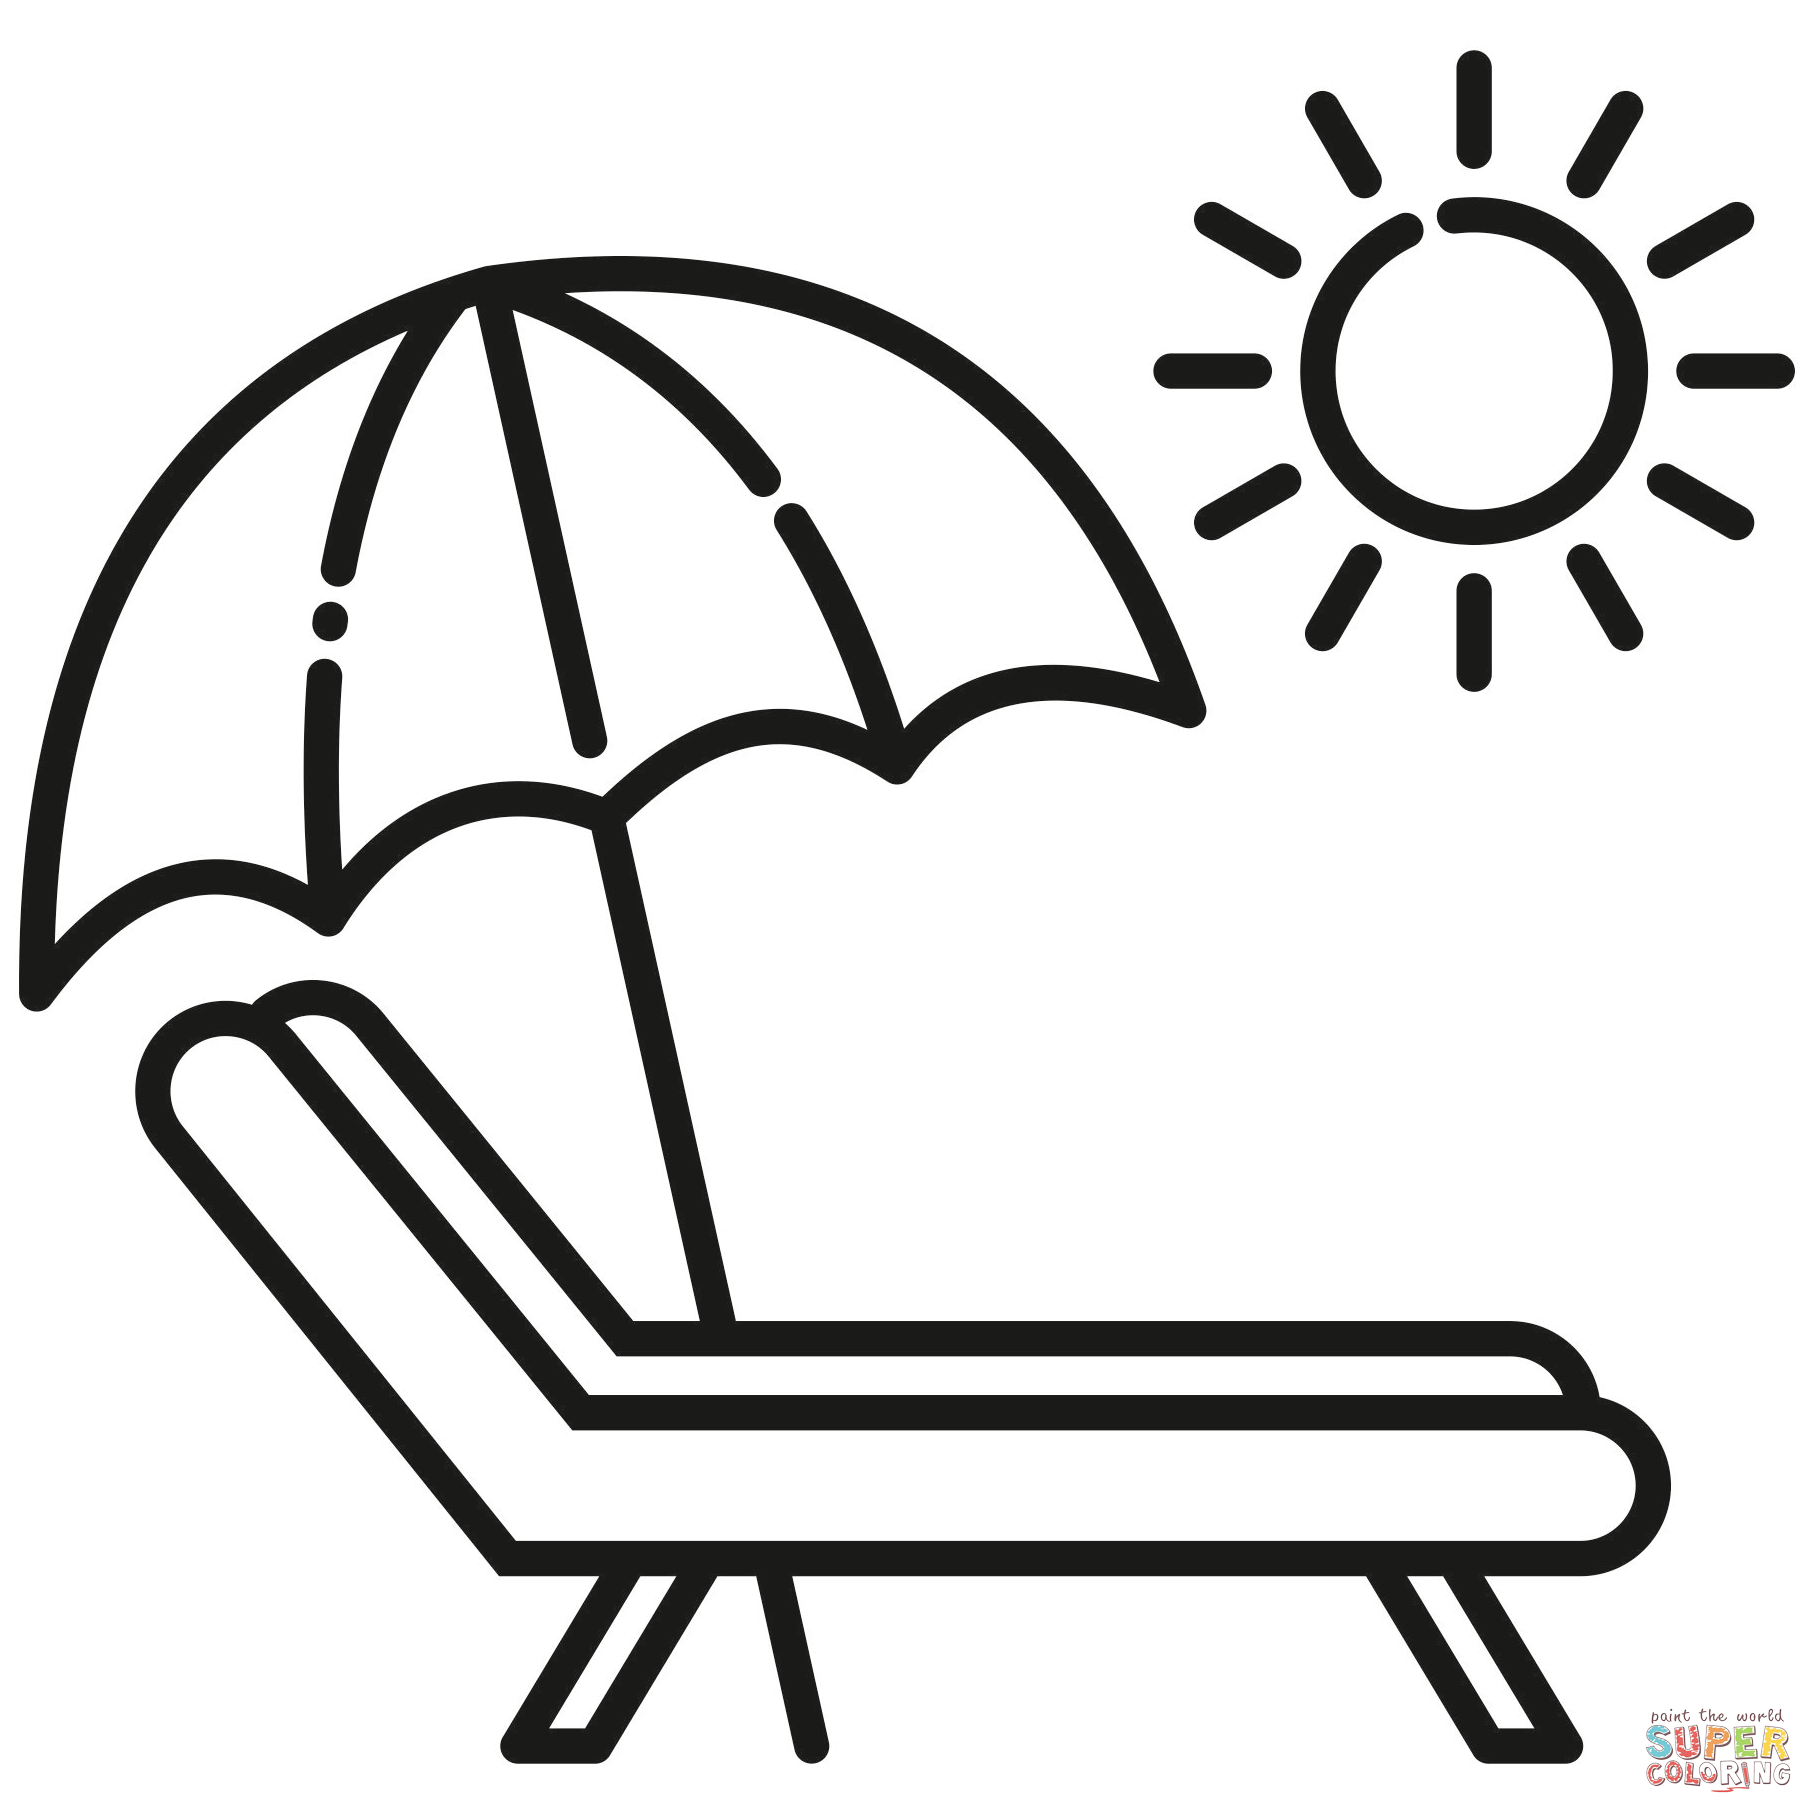 Beach Chair coloring page | Free Printable Coloring Pages